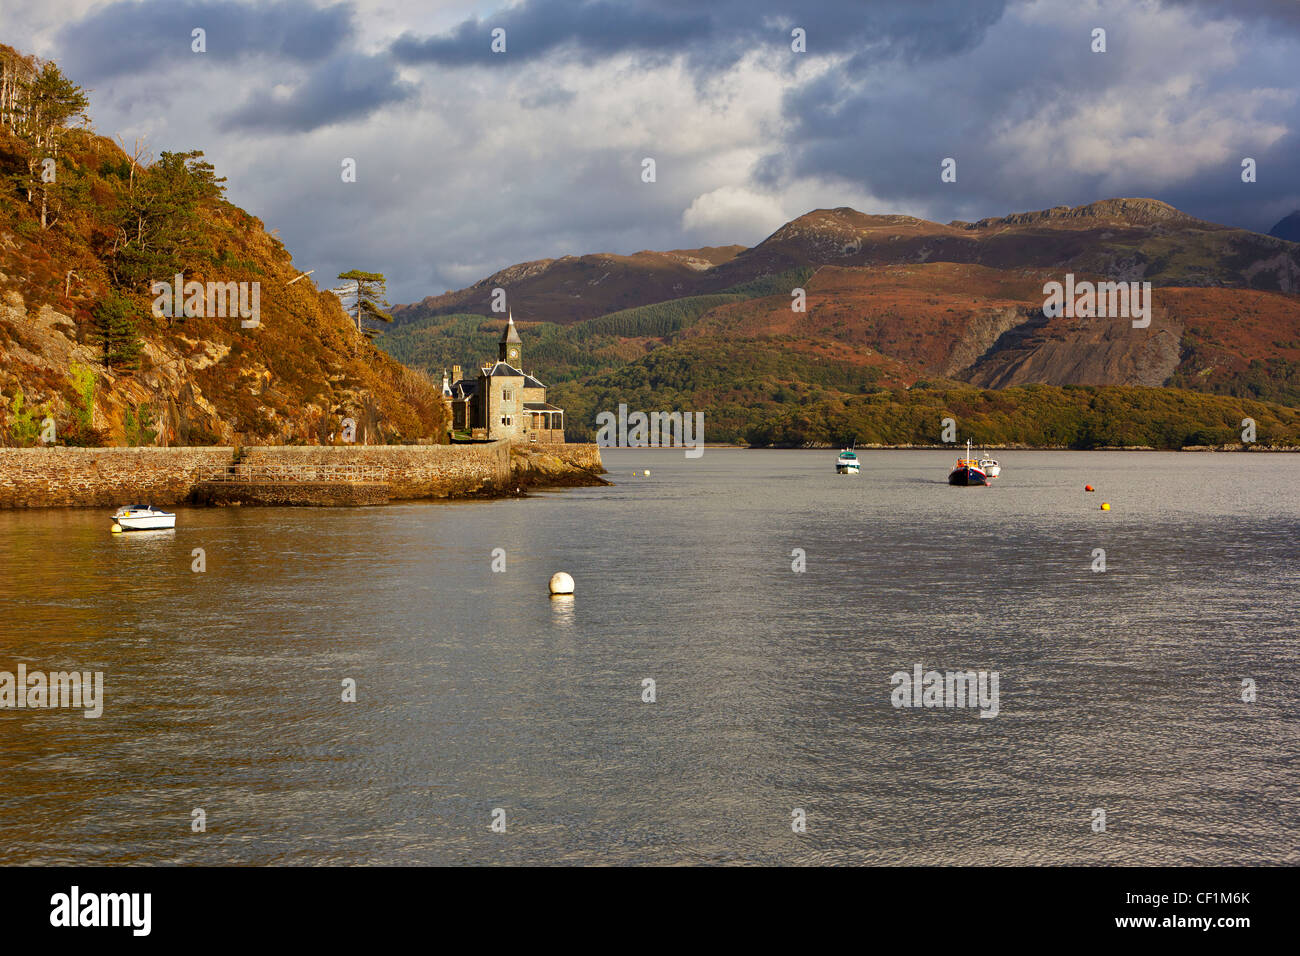 Boats moored on the Mawddach Estuary by the Old Customs House. Stock Photo